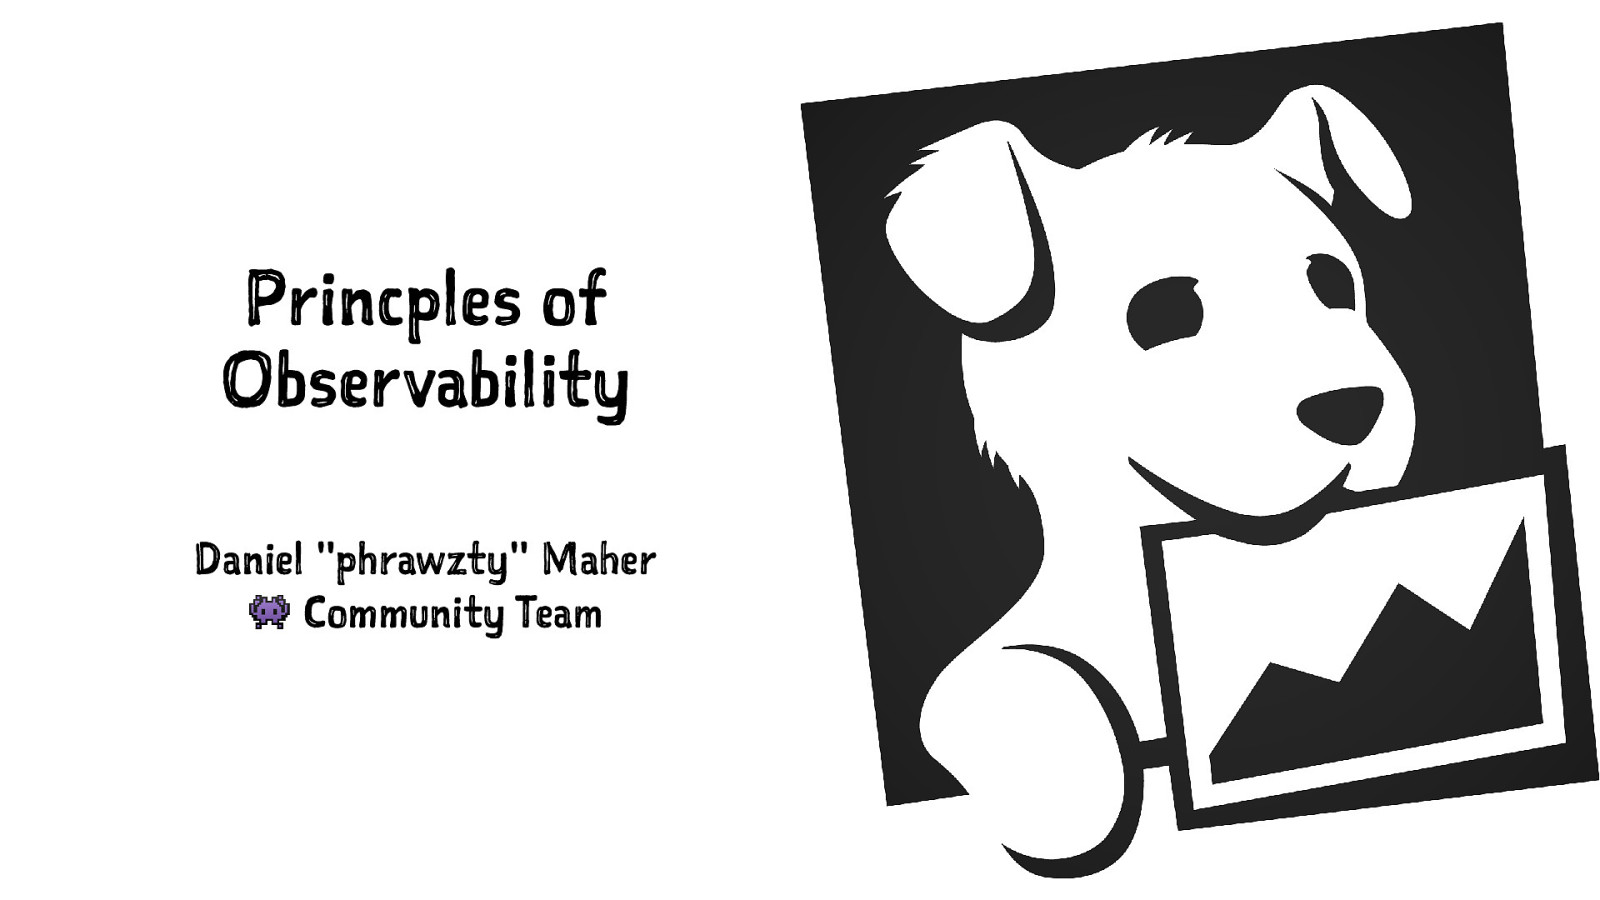 Principles of Observability